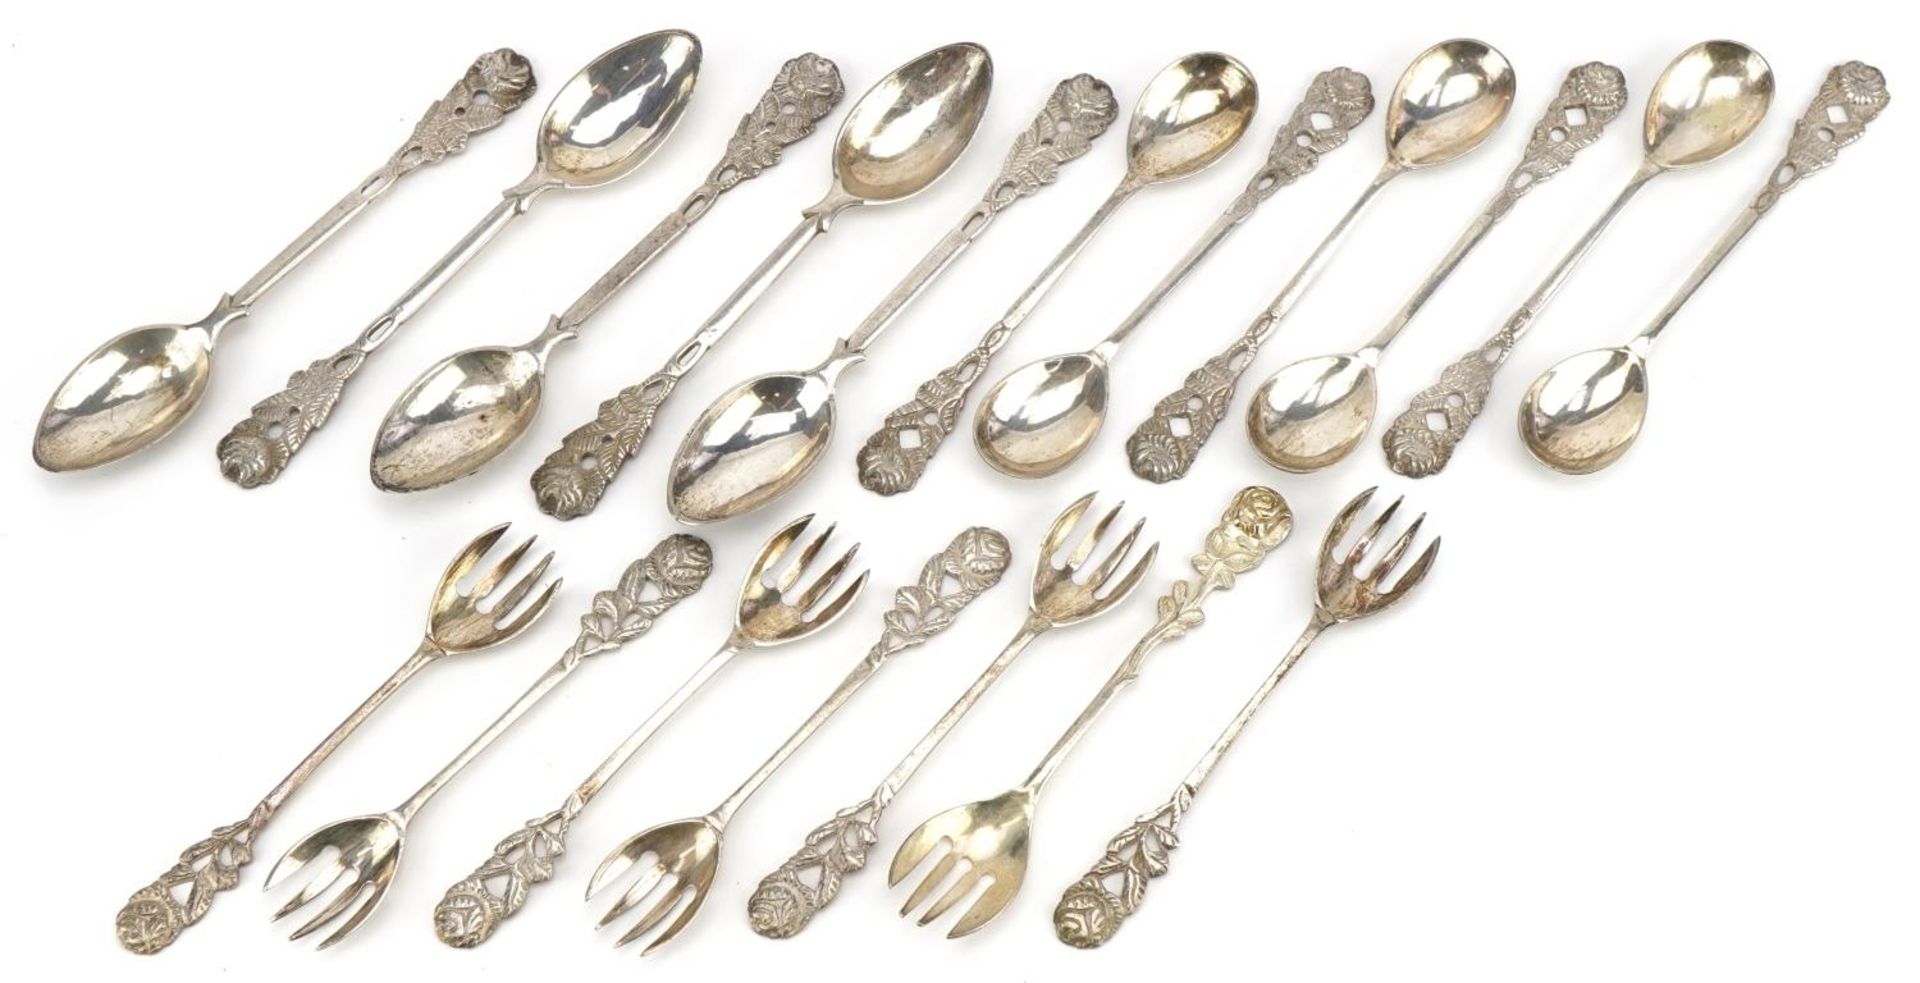 Eighteen 800 grade silver forks and spoons with naturalistic terminals, 12.5cm in length, 290.0g :